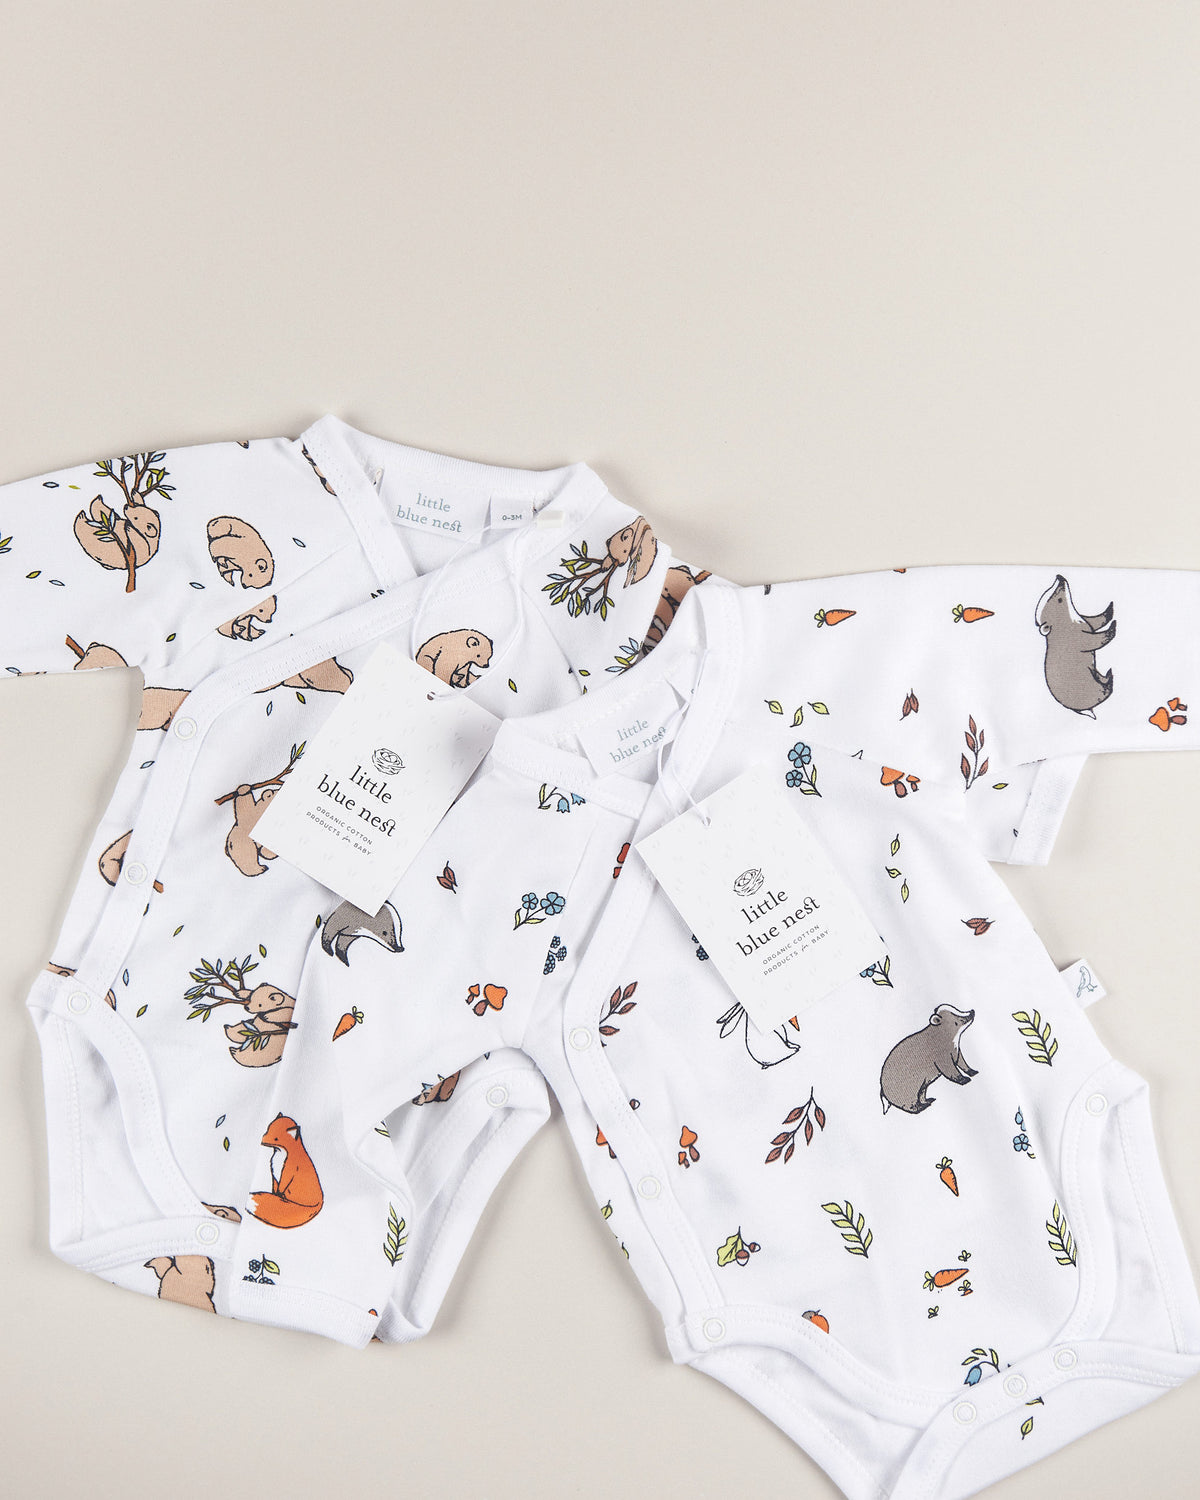 Bear cub and woodland bodysuit details with swing tag packaging